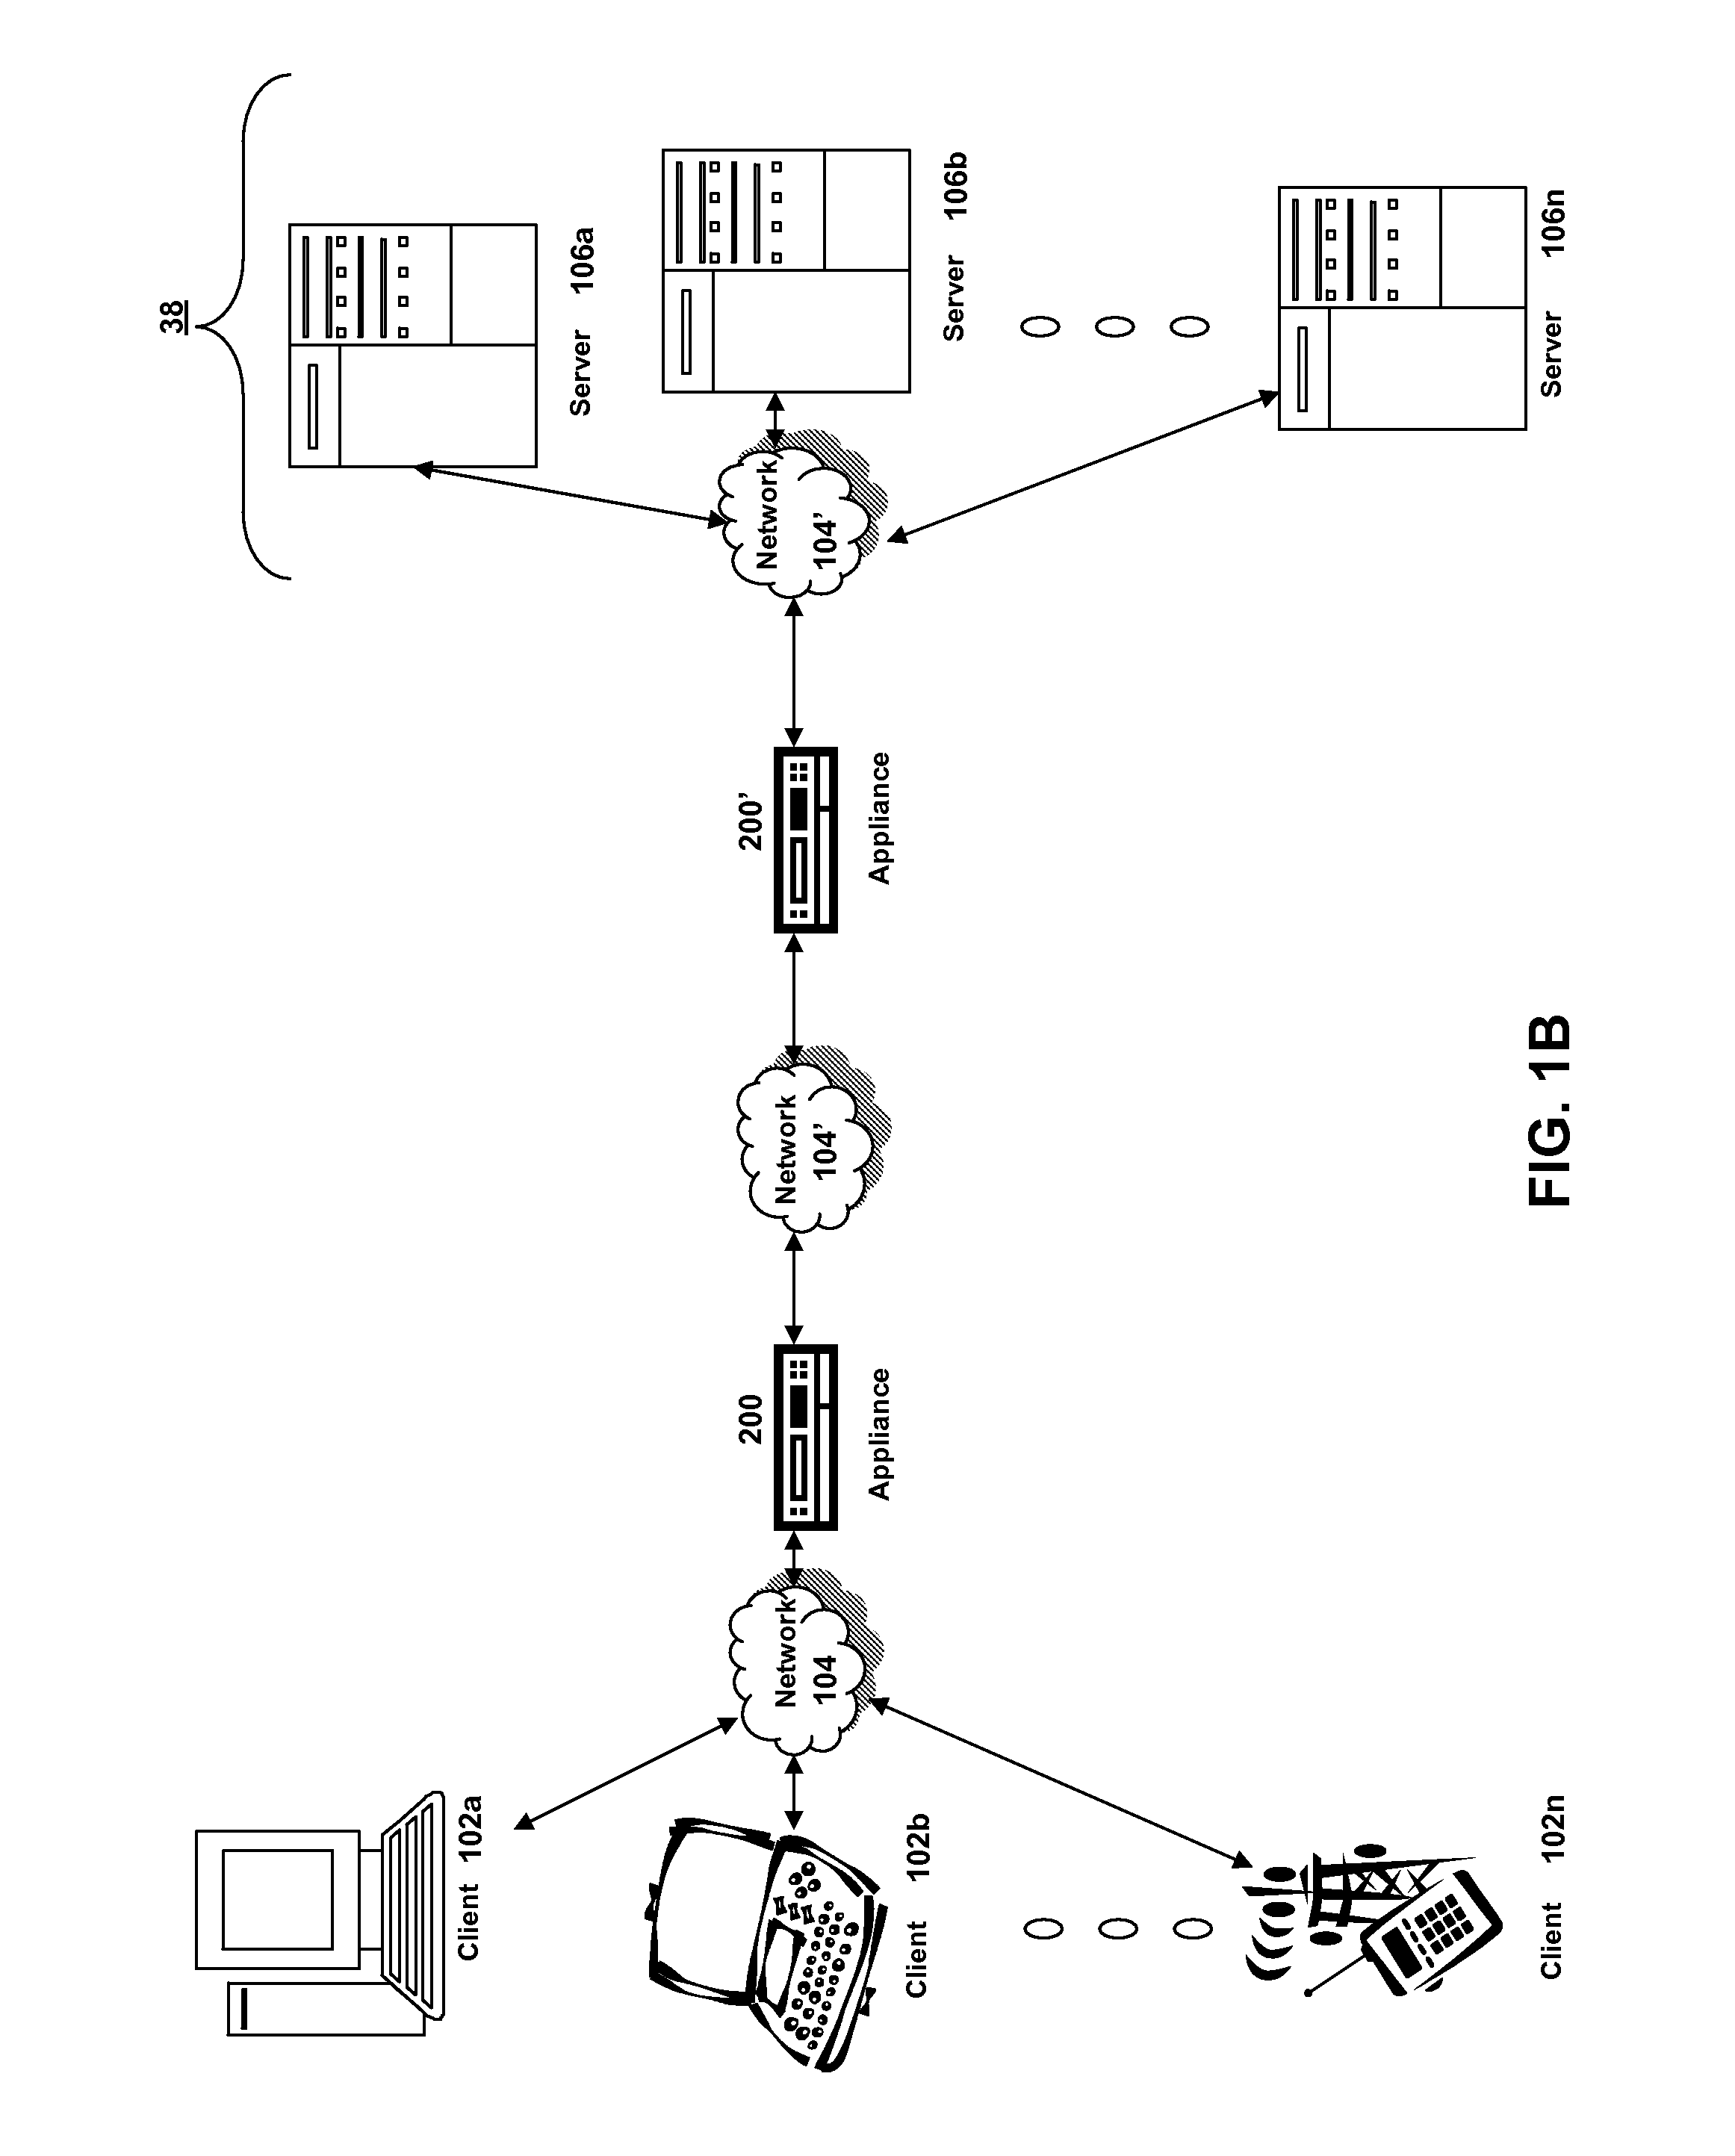 Systems and Methods for Providing Global Server Load Balancing of Heterogeneous Devices